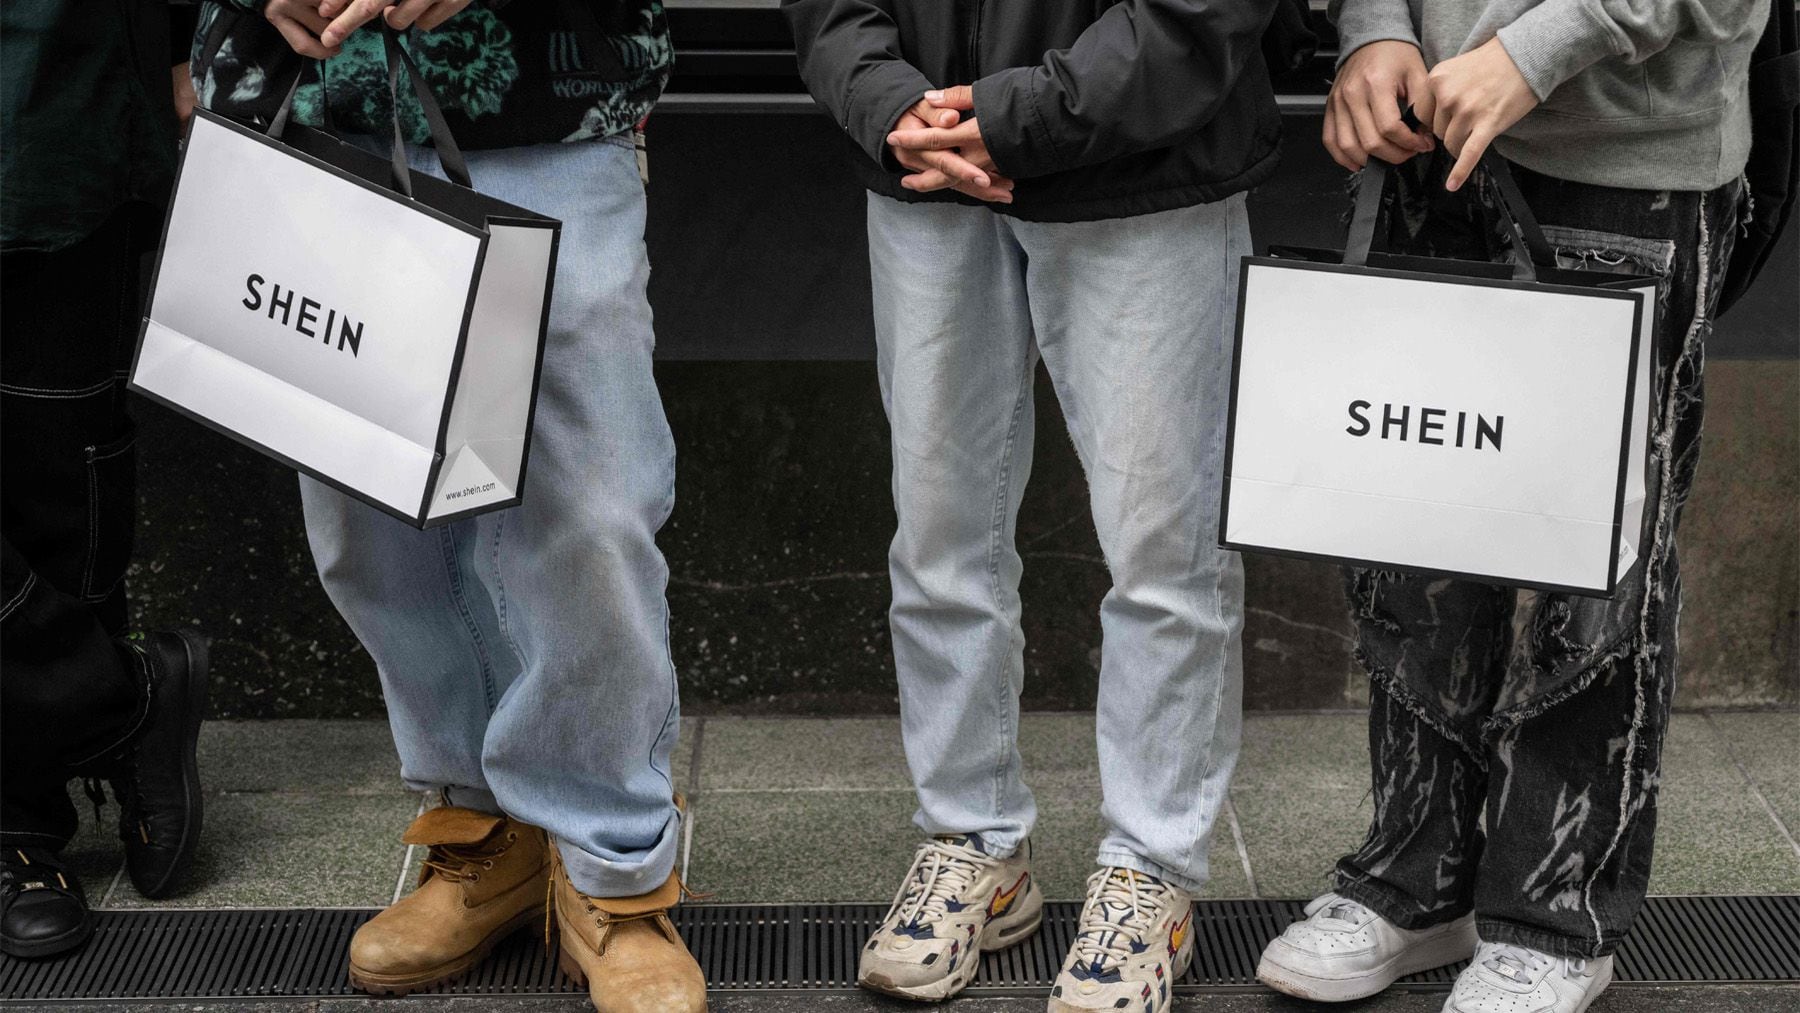 Shein’s IPO Plan to Fuel Scrutiny Over Cotton, China Roots